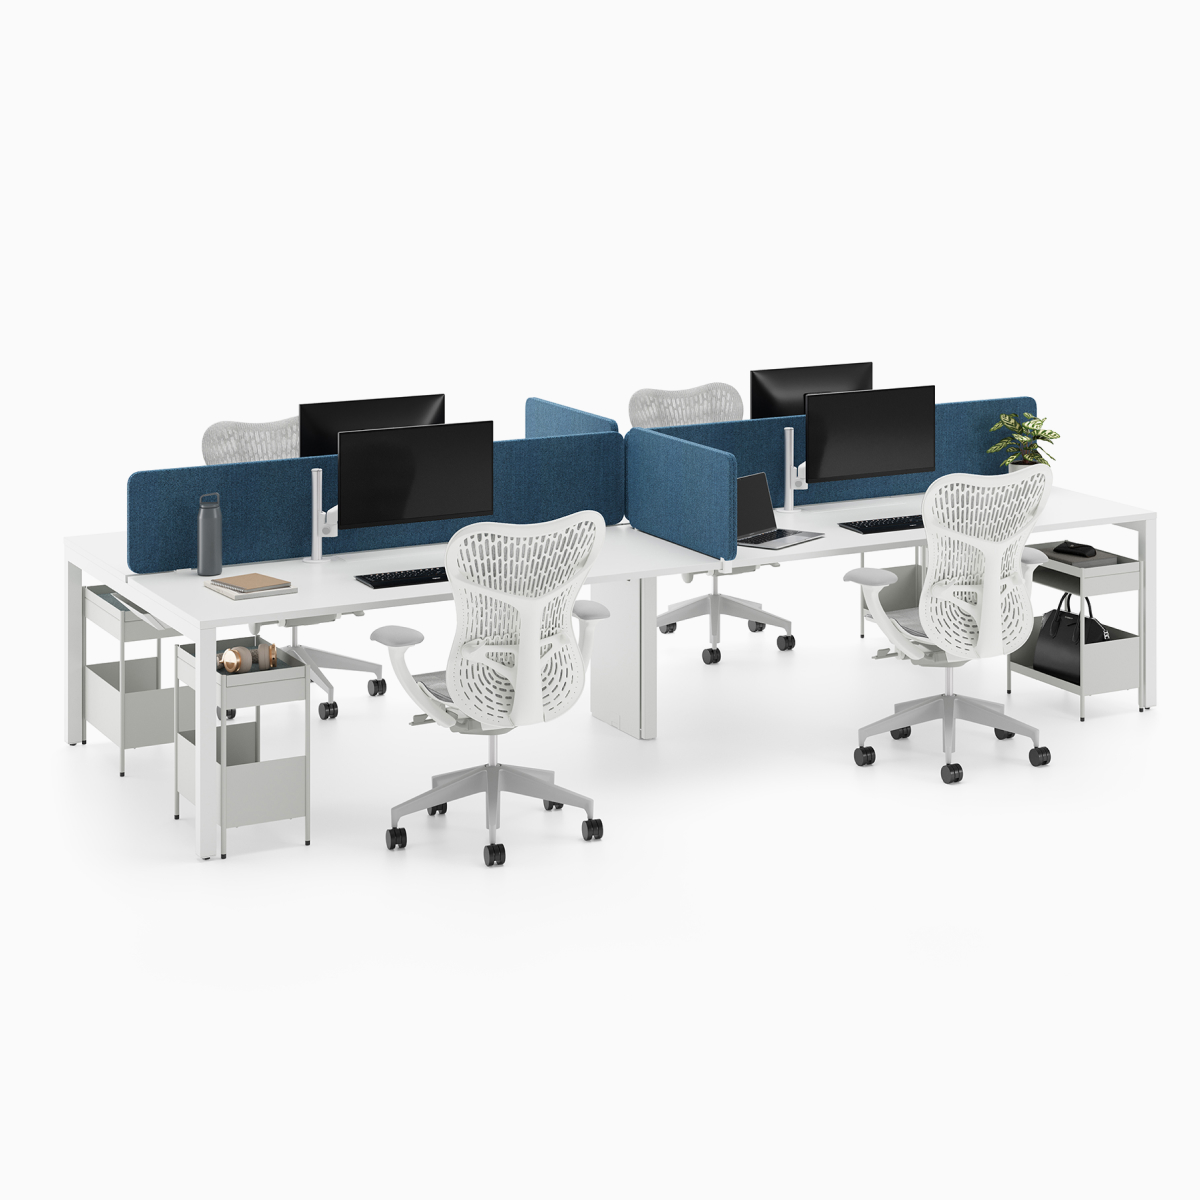 Side-by-side Layout Studio workstation applications with Mirra 2 Chairs.